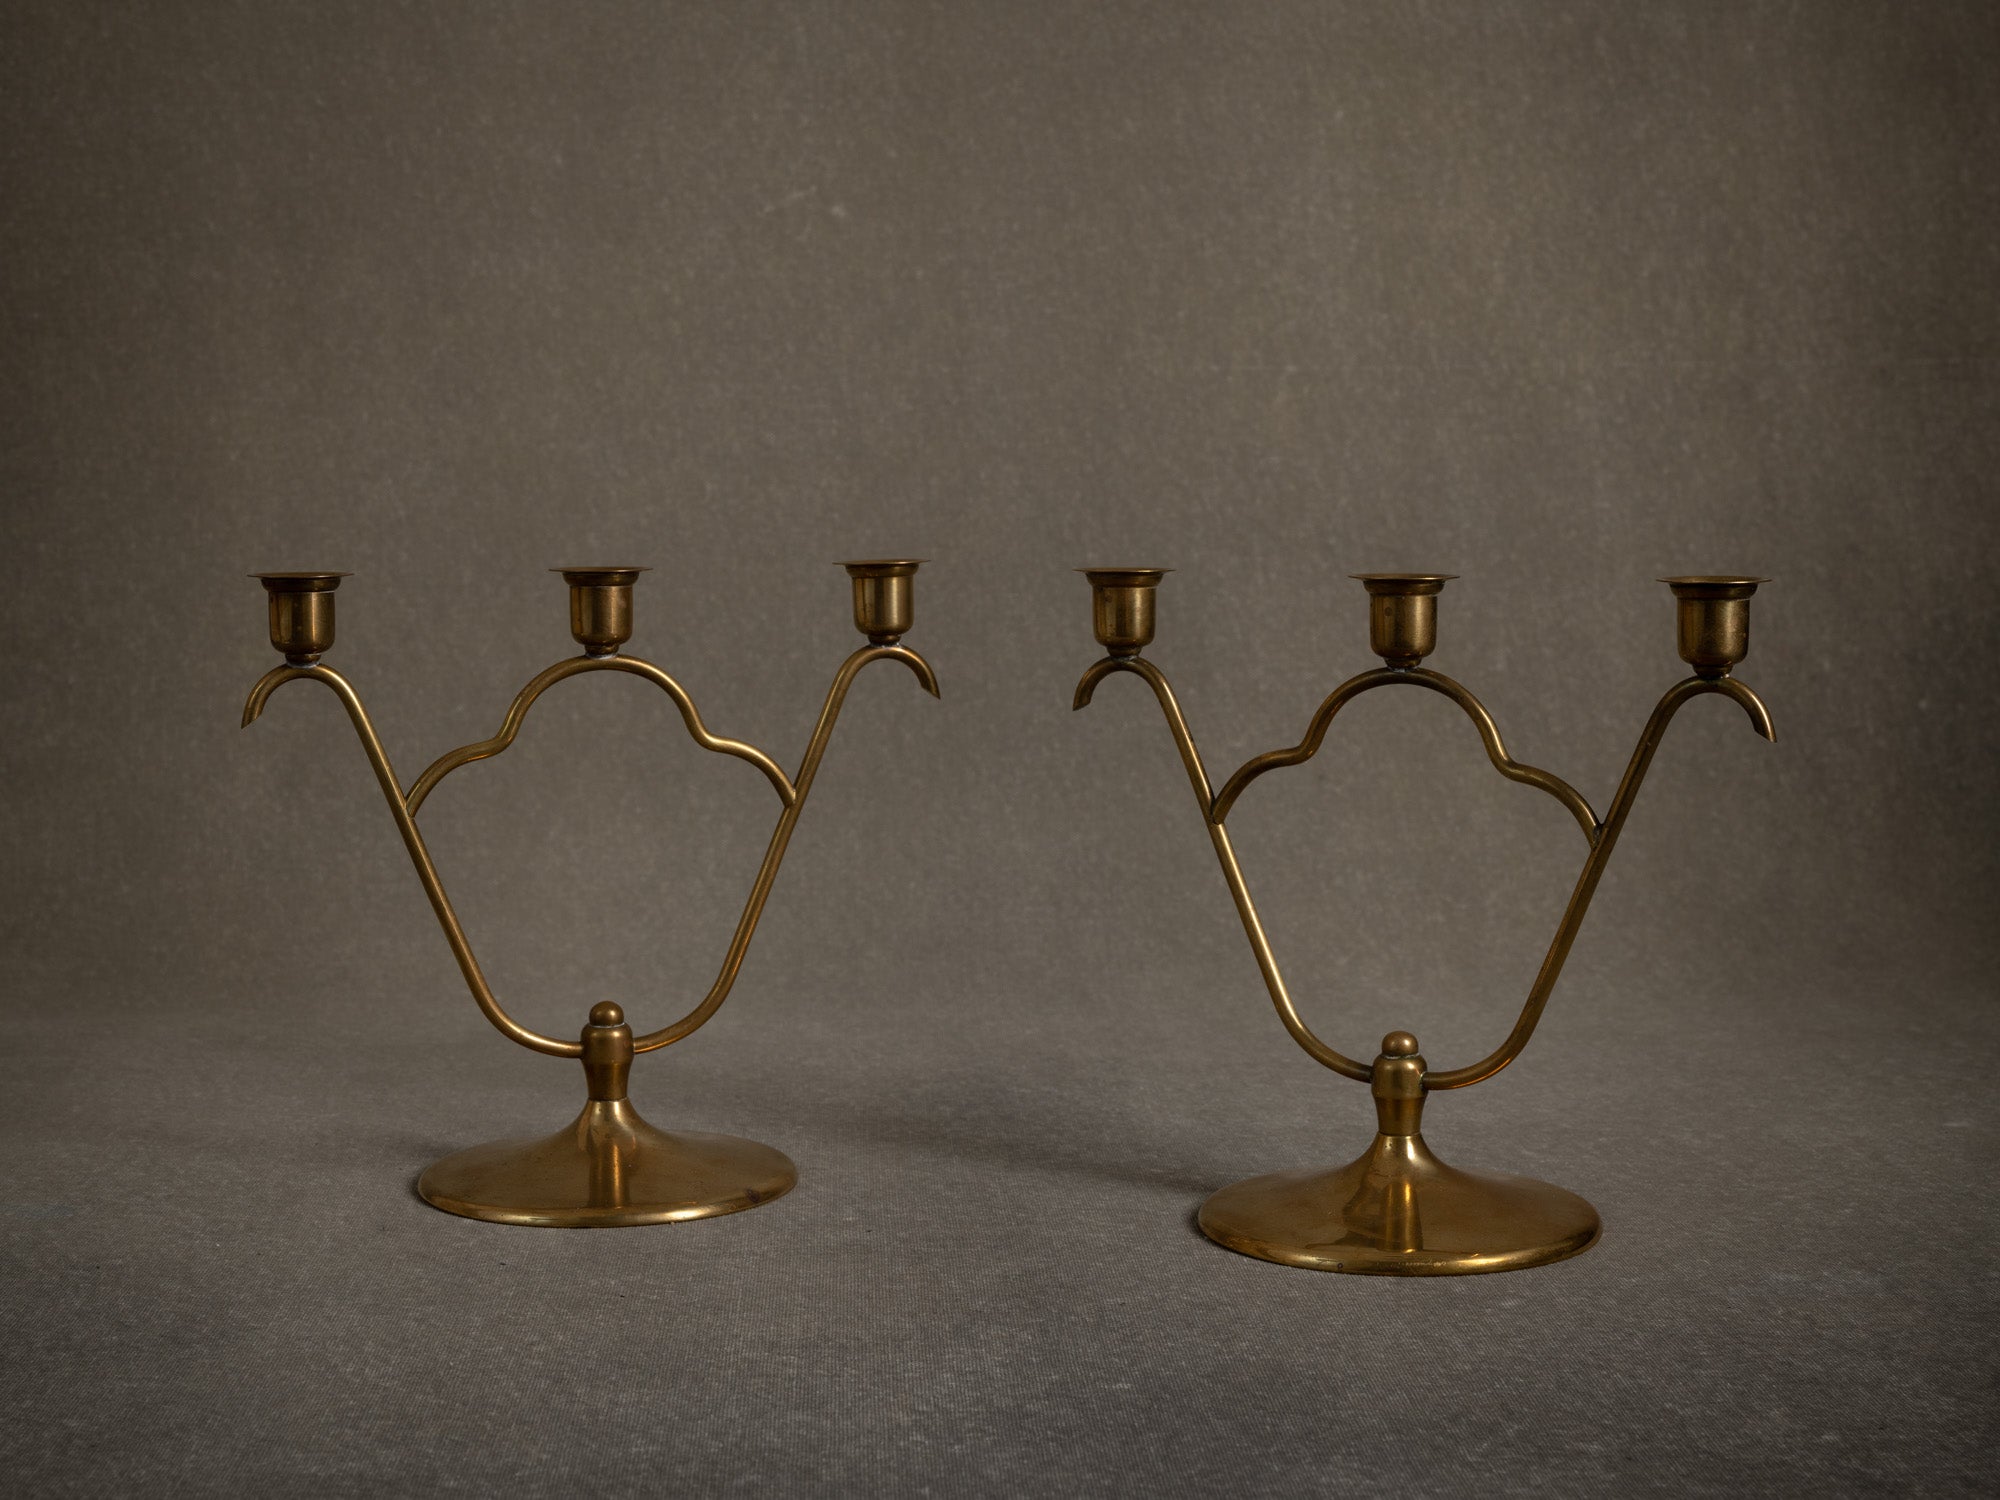 Paire de bougeoirs / candélabres de table en laiton par O.H. Lagerstedt, Suède (vers 1930-40)..Pair of brass "swedish grace" candle holders / table candelabra by O.H. Lagerstedt, Sweden (circa 1930-40)